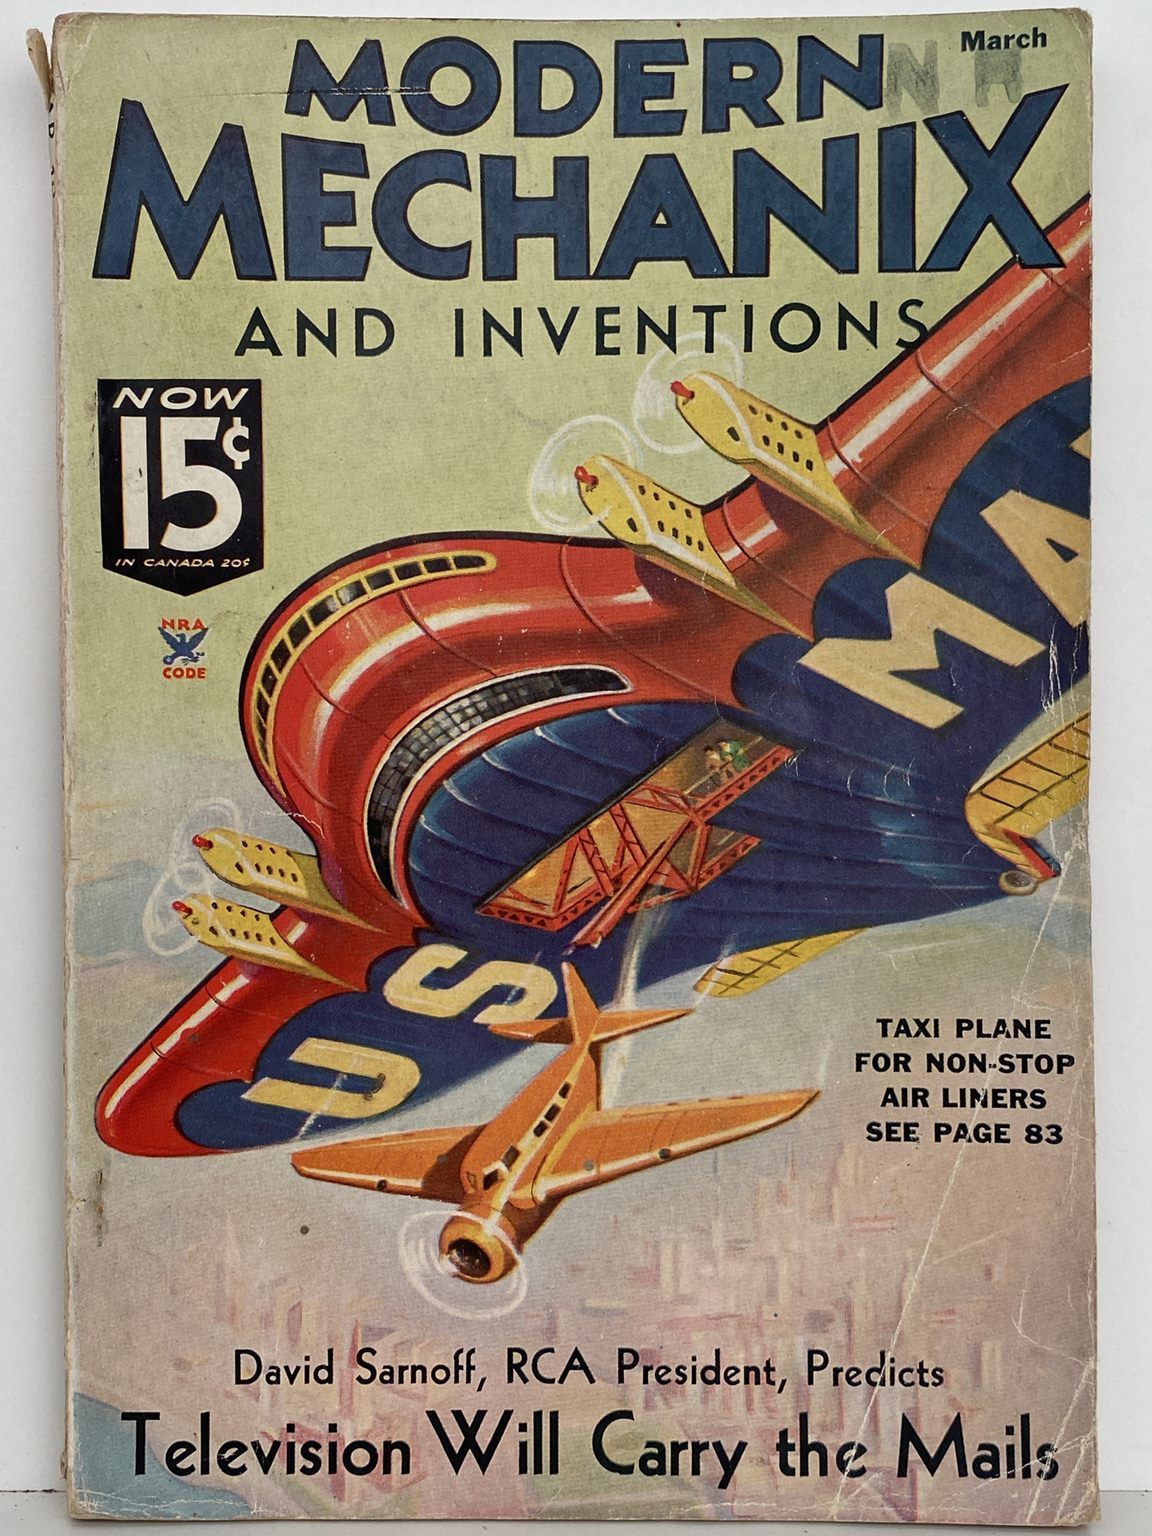 VINTAGE MAGAZINE: Modern Mechanix and Inventions - Vol 13, No. 5 - March 1935